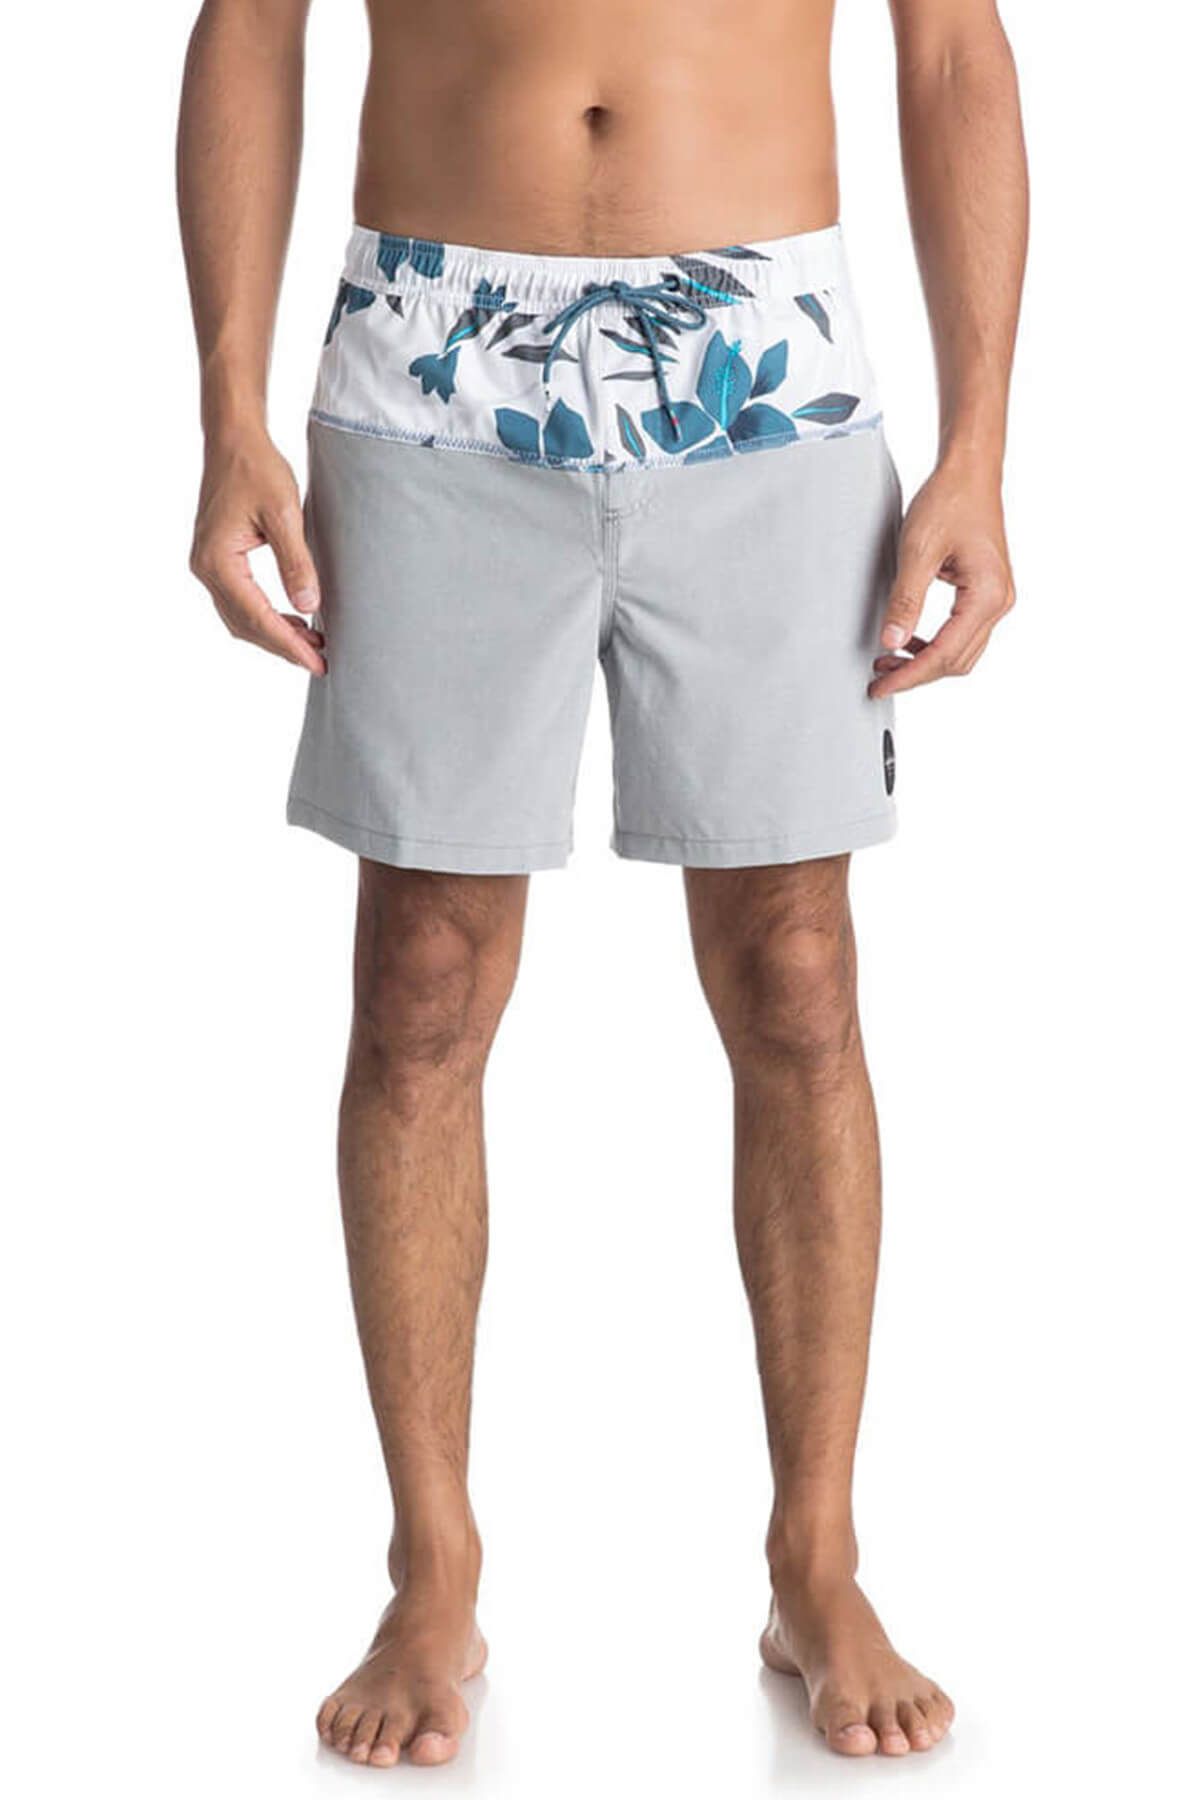 Quiksilver Cut Out Volley 17" Boardshort